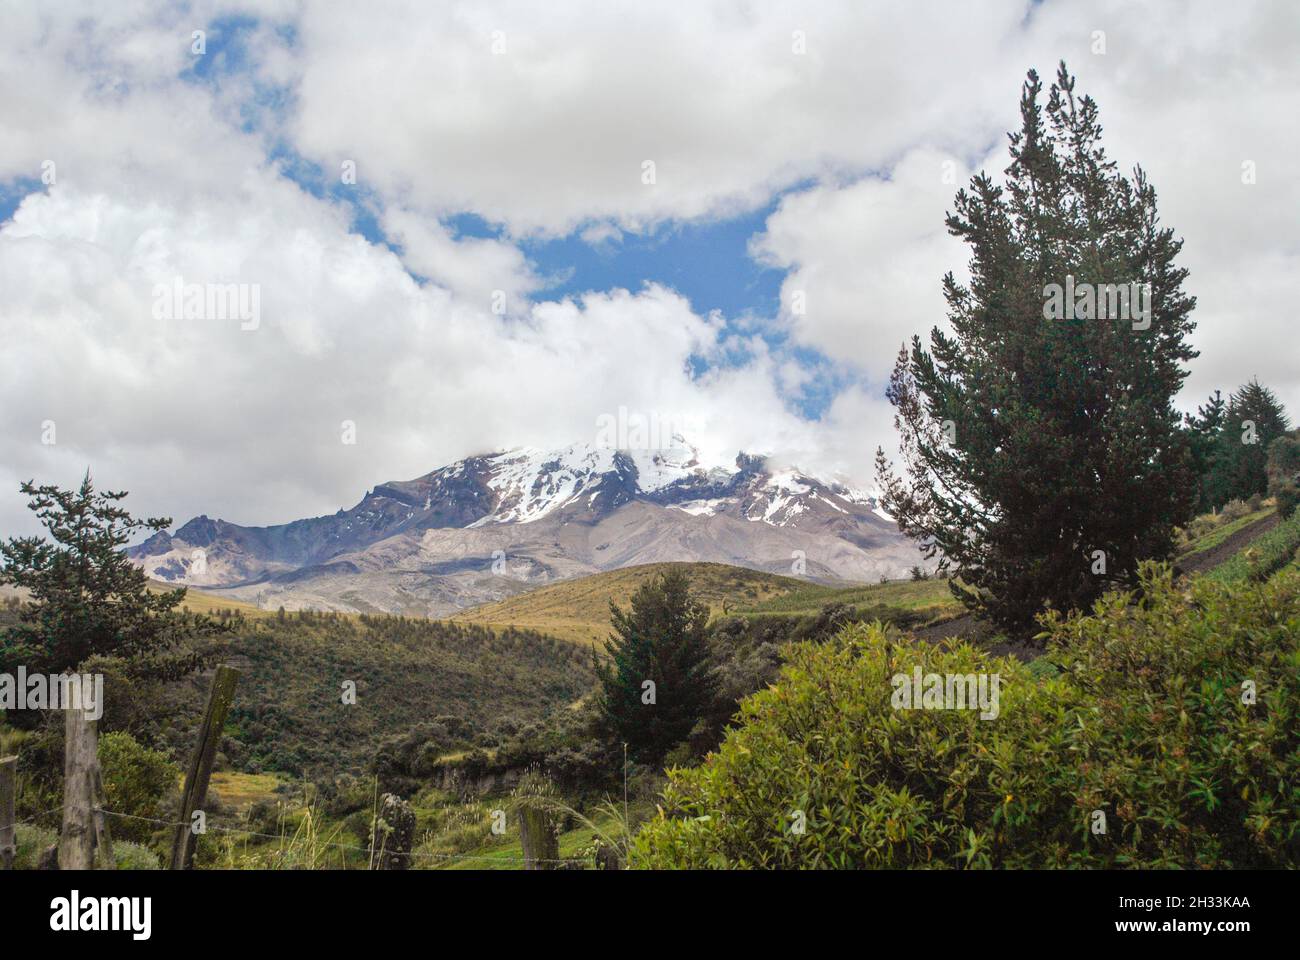 Landscape with Chimborazo volcano with its summit partially covered with clouds.   Chimborazo, Ecuador Stock Photo